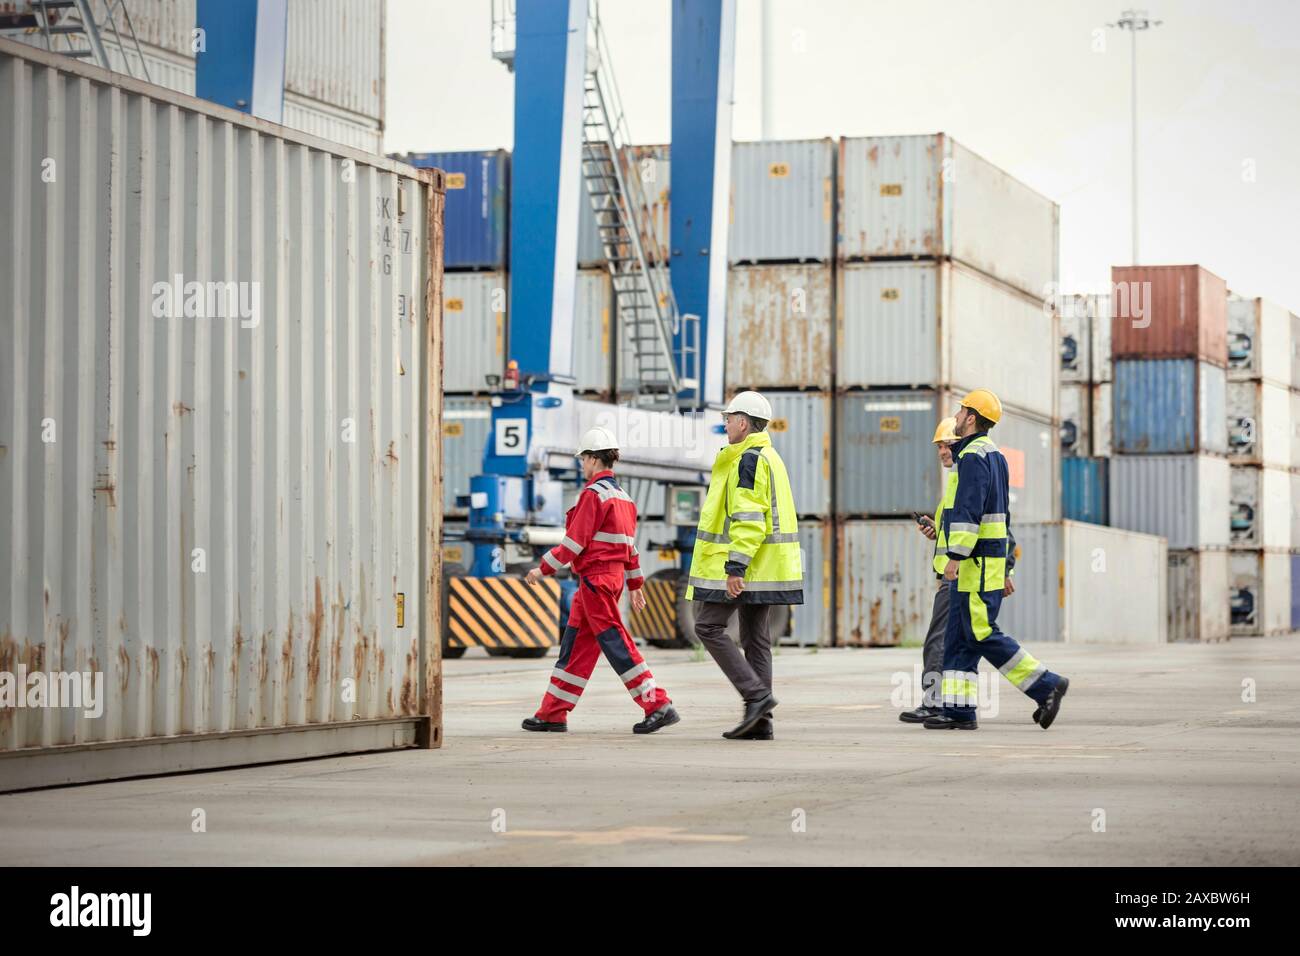 Dock workers walking along cargo containers at shipyard Stock Photo